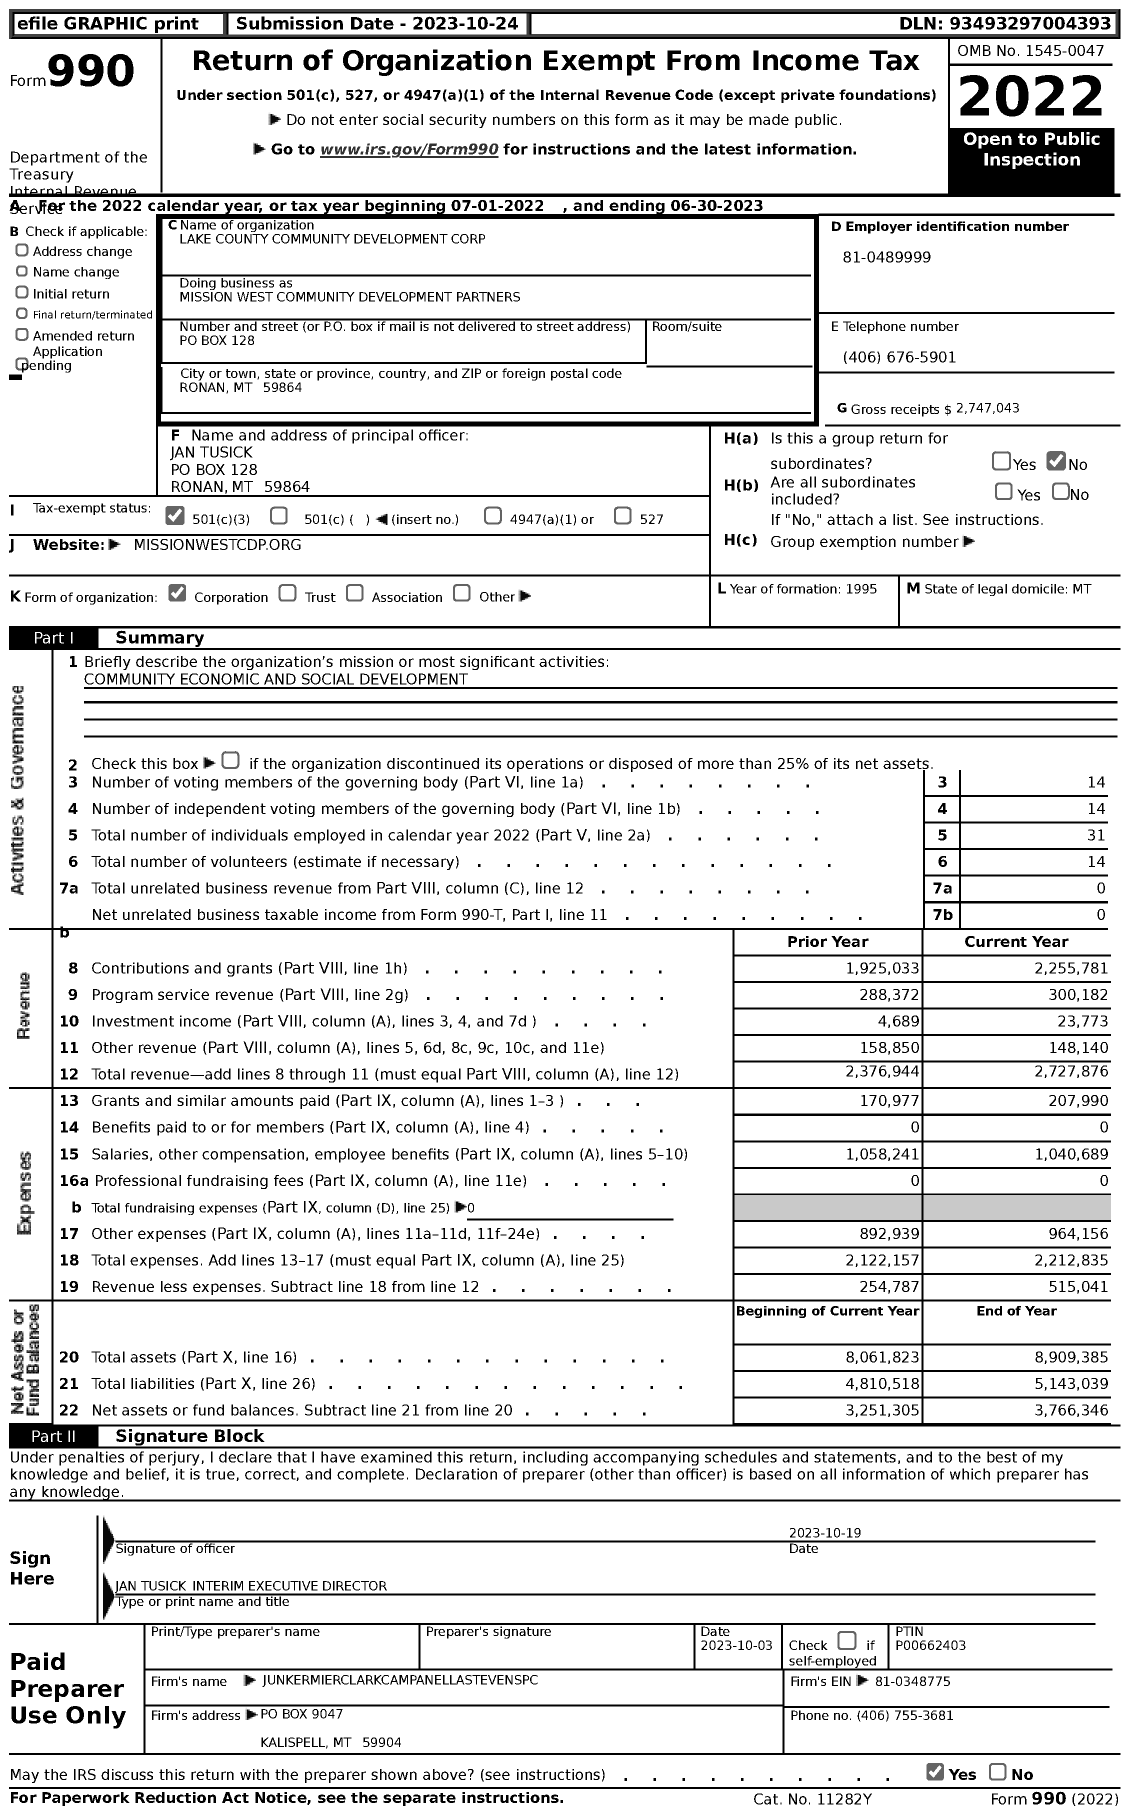 Image of first page of 2022 Form 990 for Mission West Community Development Partners